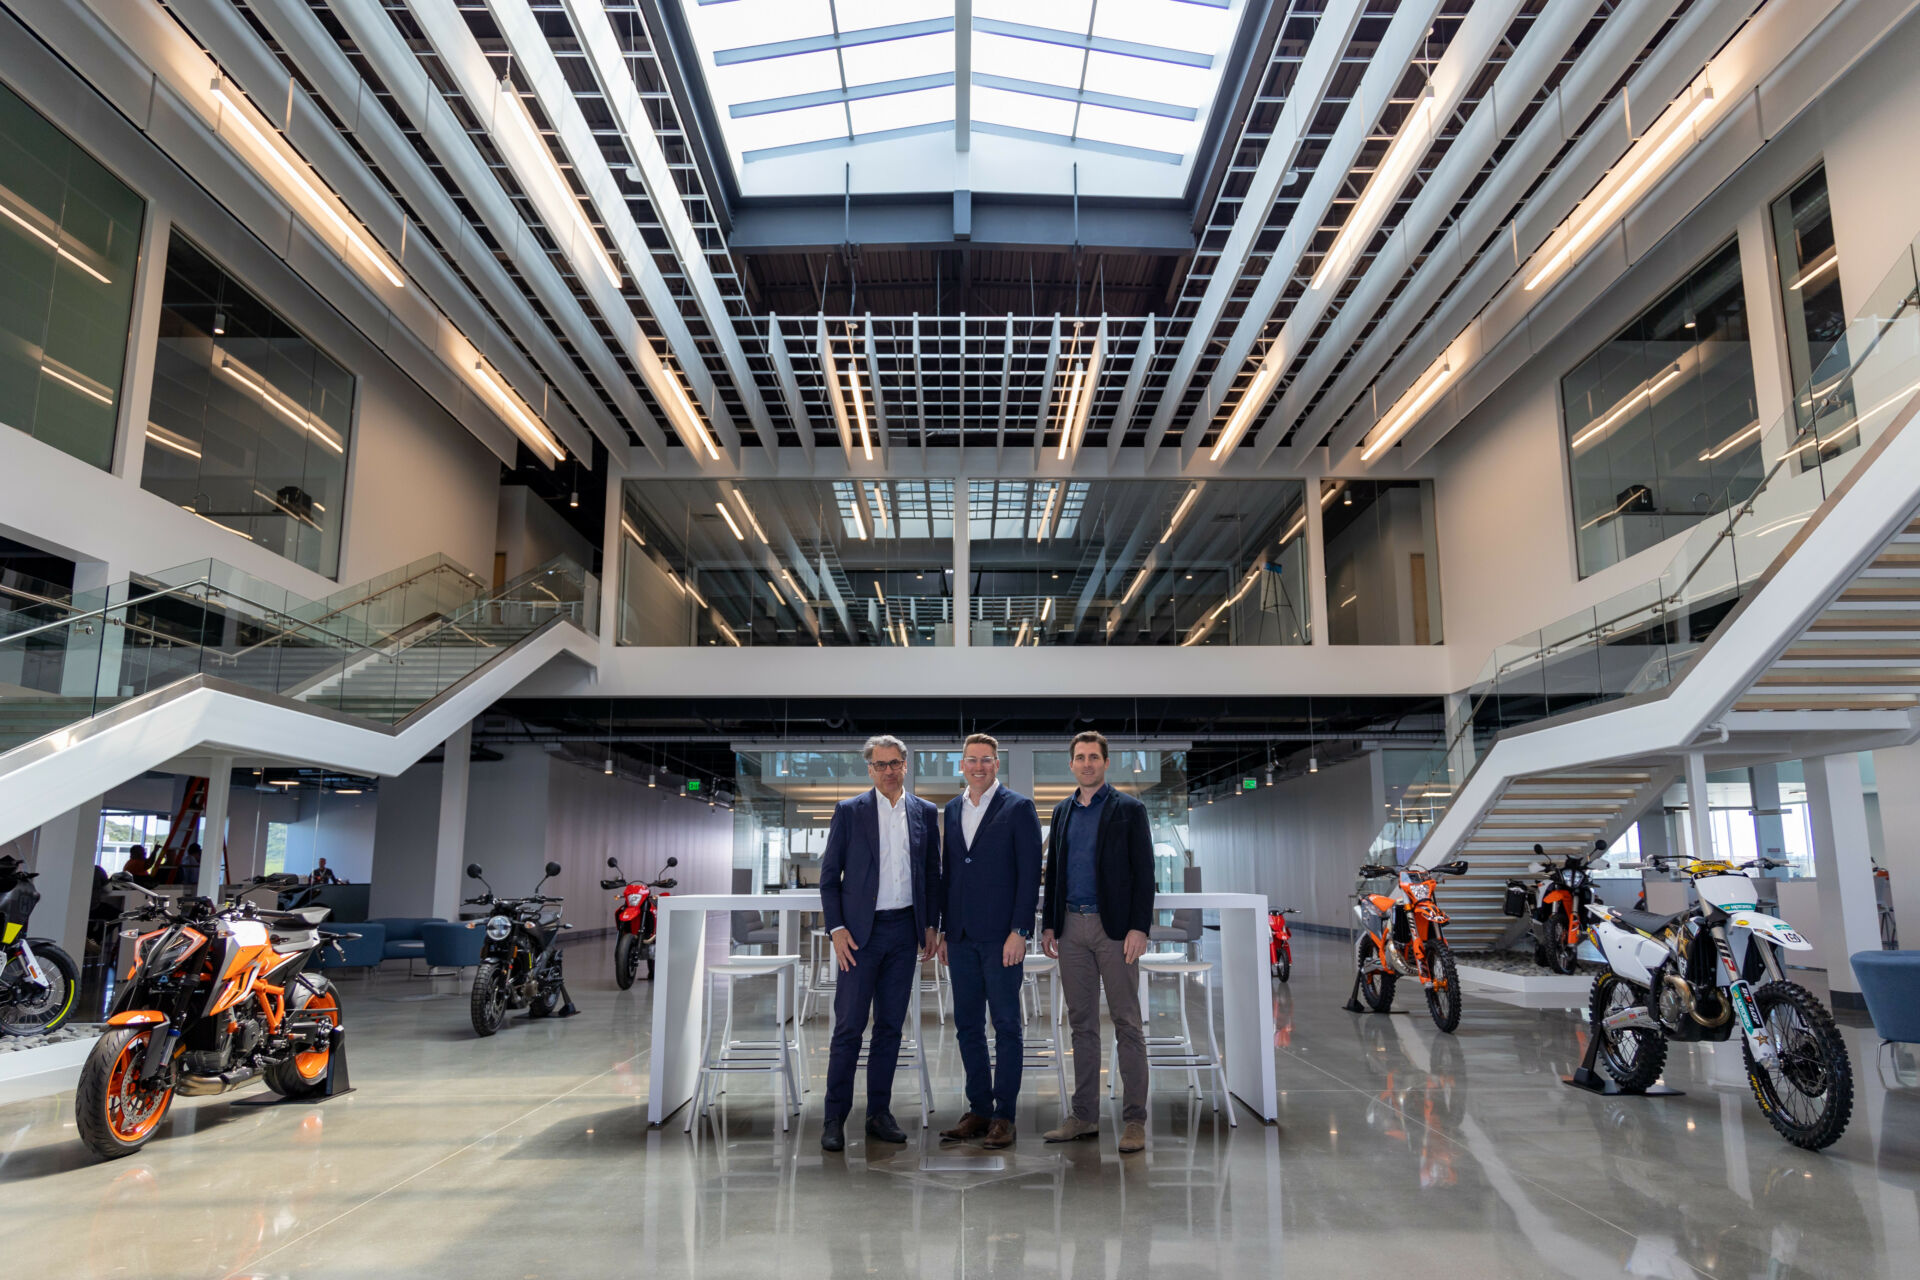 (From left) Stefan Pierer, PIERER Mobility AG CEO; John Hinz, CEO of KTM North America, Inc. and PIERER New Mobility North America, Inc.; and Florian Kecht, a Member of the Executive Board of KTM AG in the lobby of the new KTM North America Inc./PIERER New Mobility North America headquarters in Murrieta, California. Photo courtesy KTM North America.